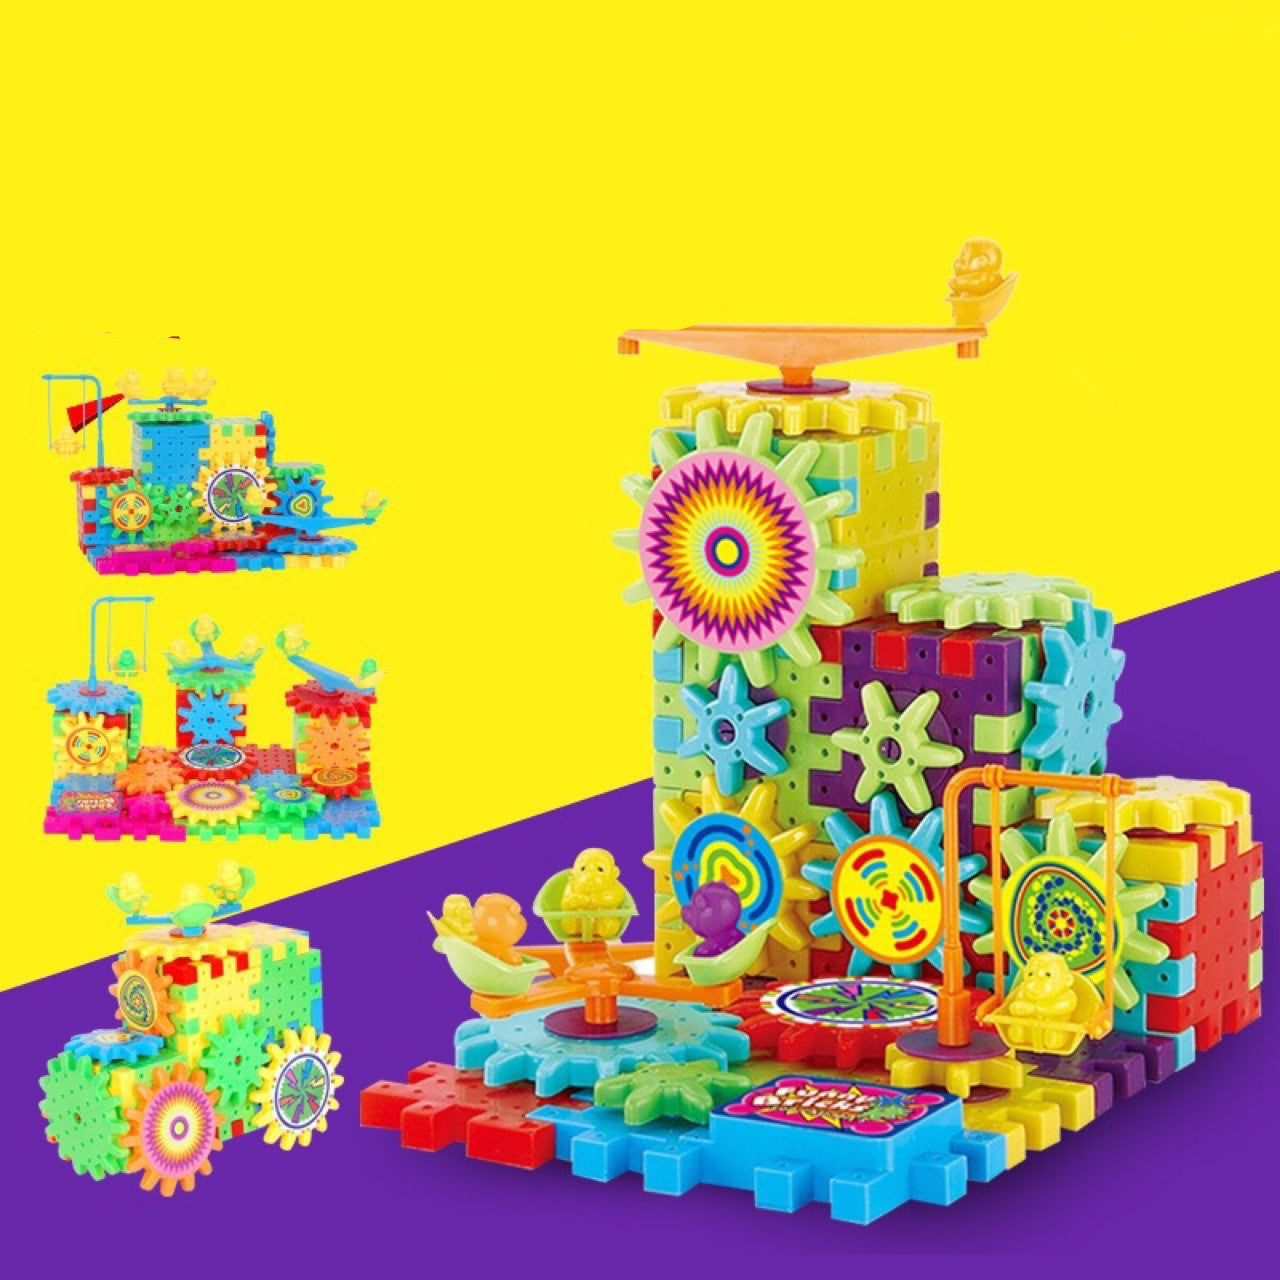 Inspire Creativity with our Electric Gears 3D Model Building Kit | Educational Toys for Kids Chikara Houses